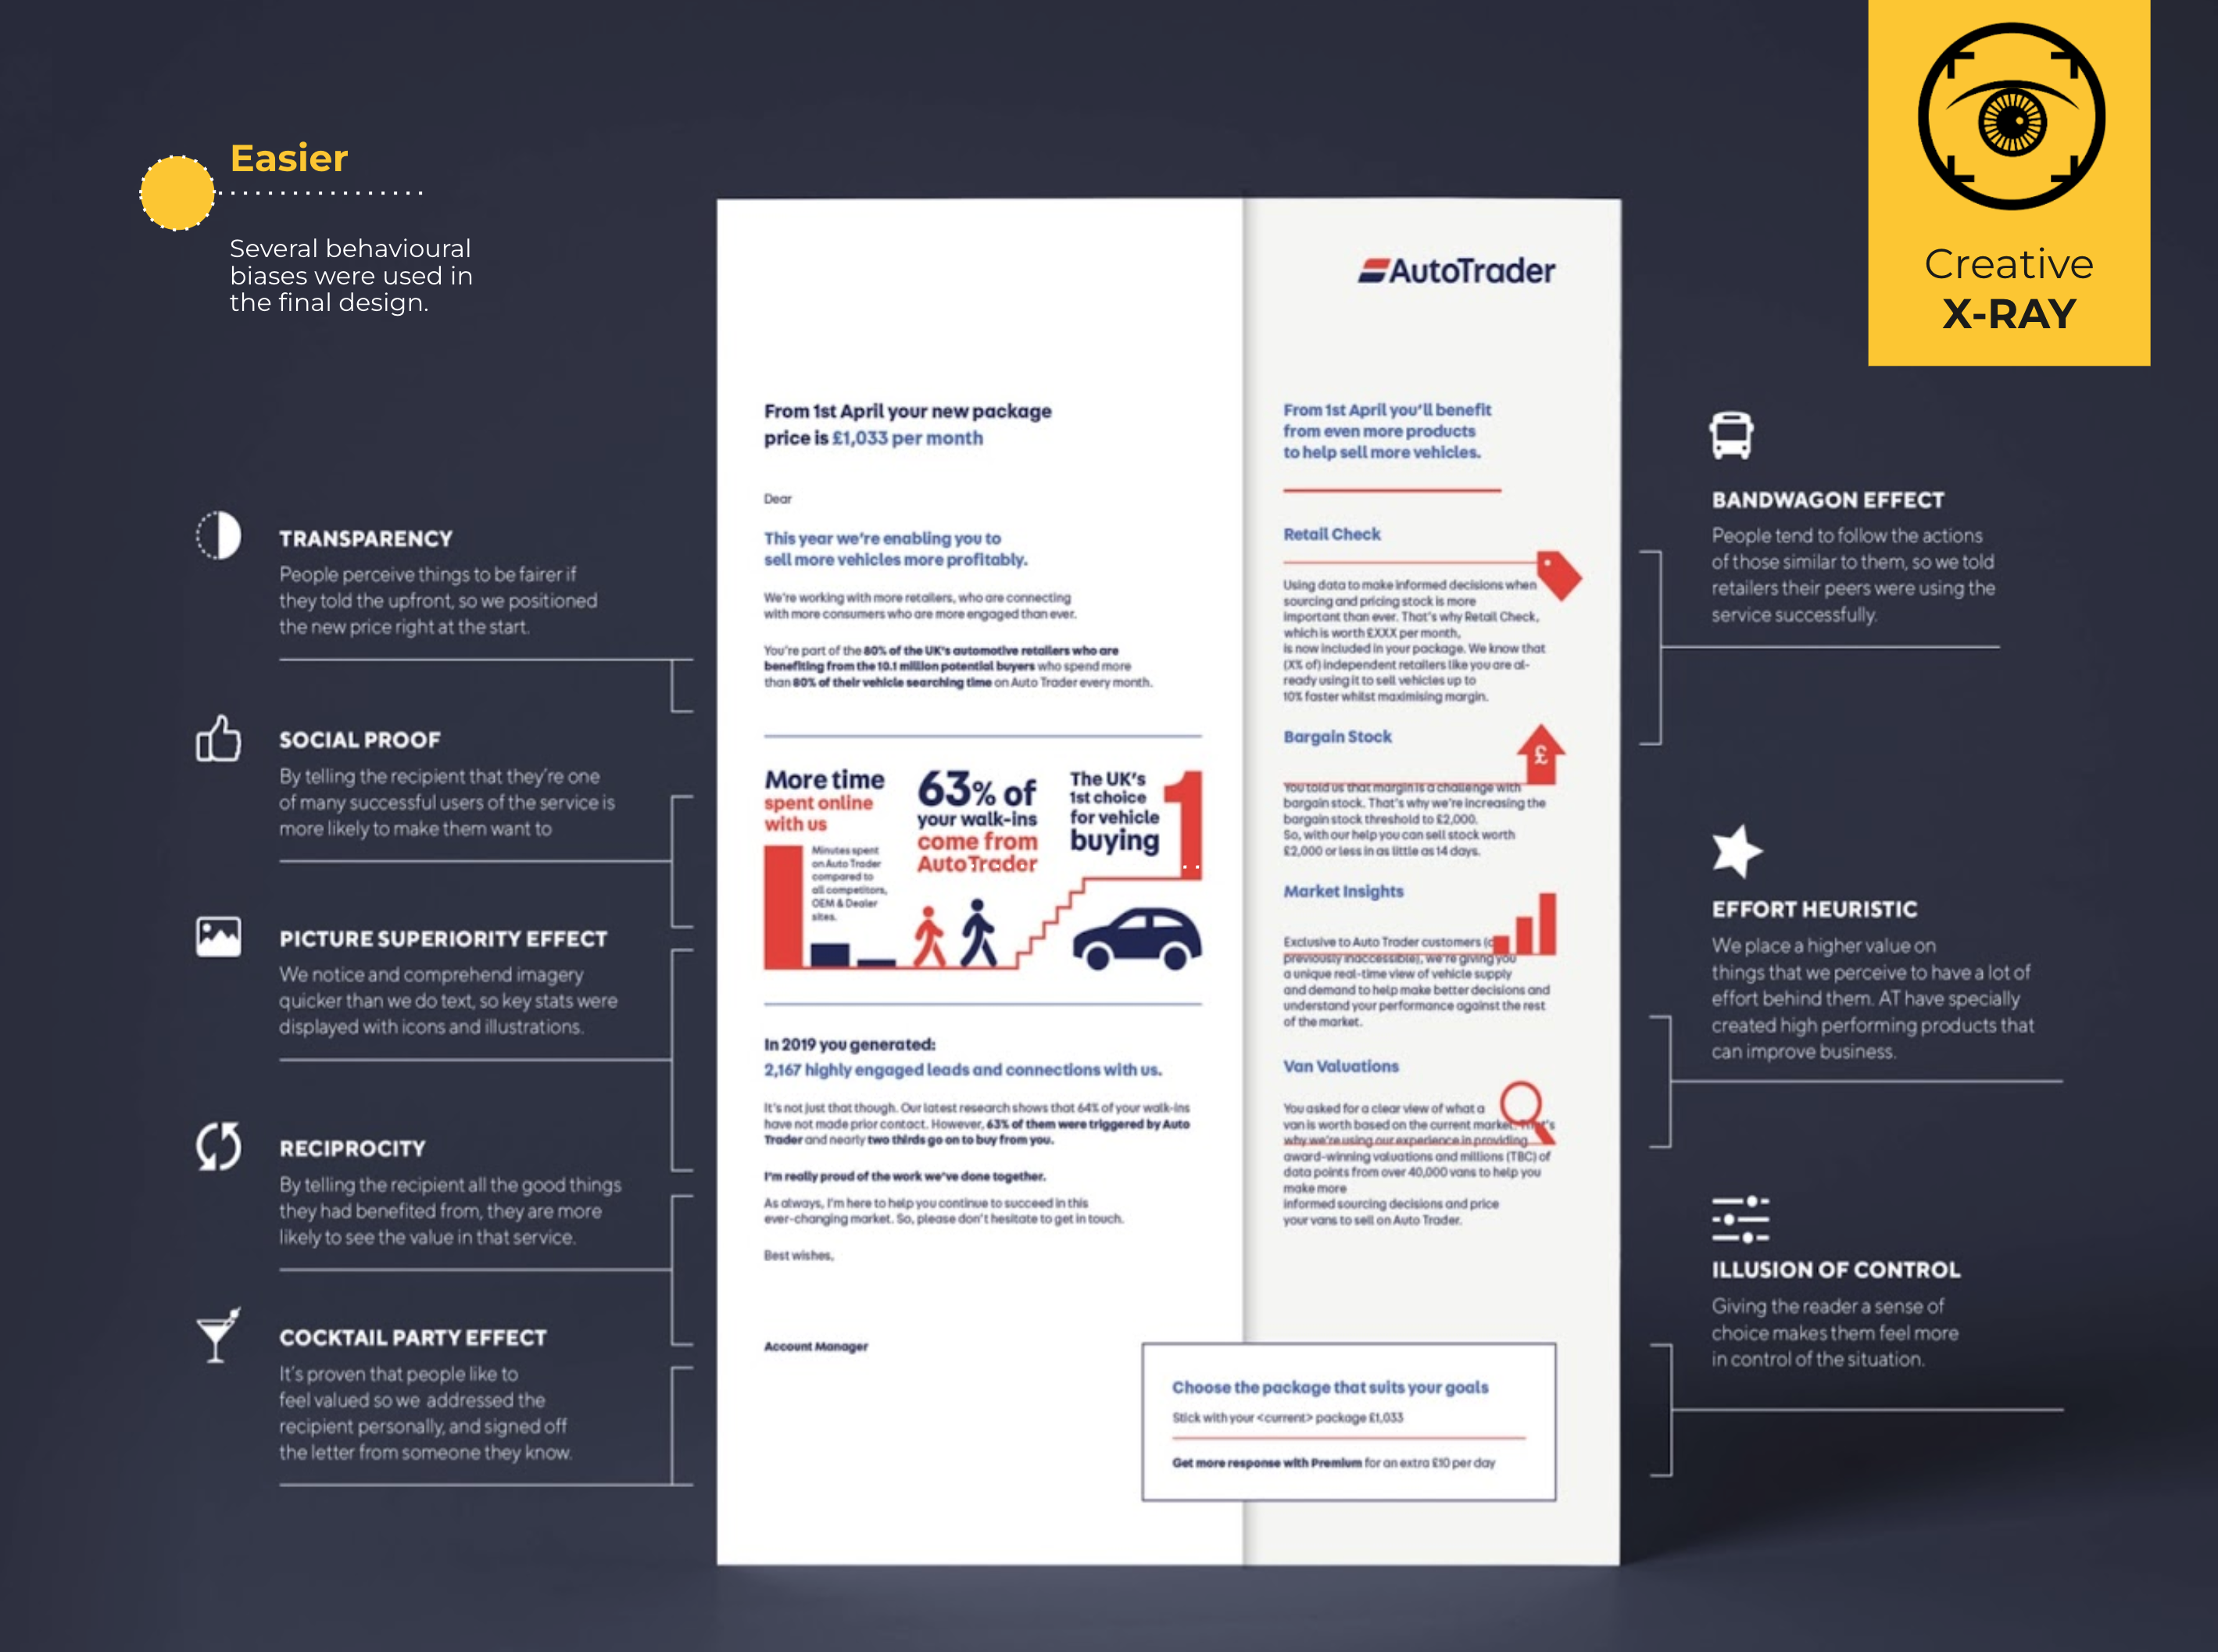 Using an annual price rise letter to convince vehicle retailers that paying a premium price represents a good investment for their business.